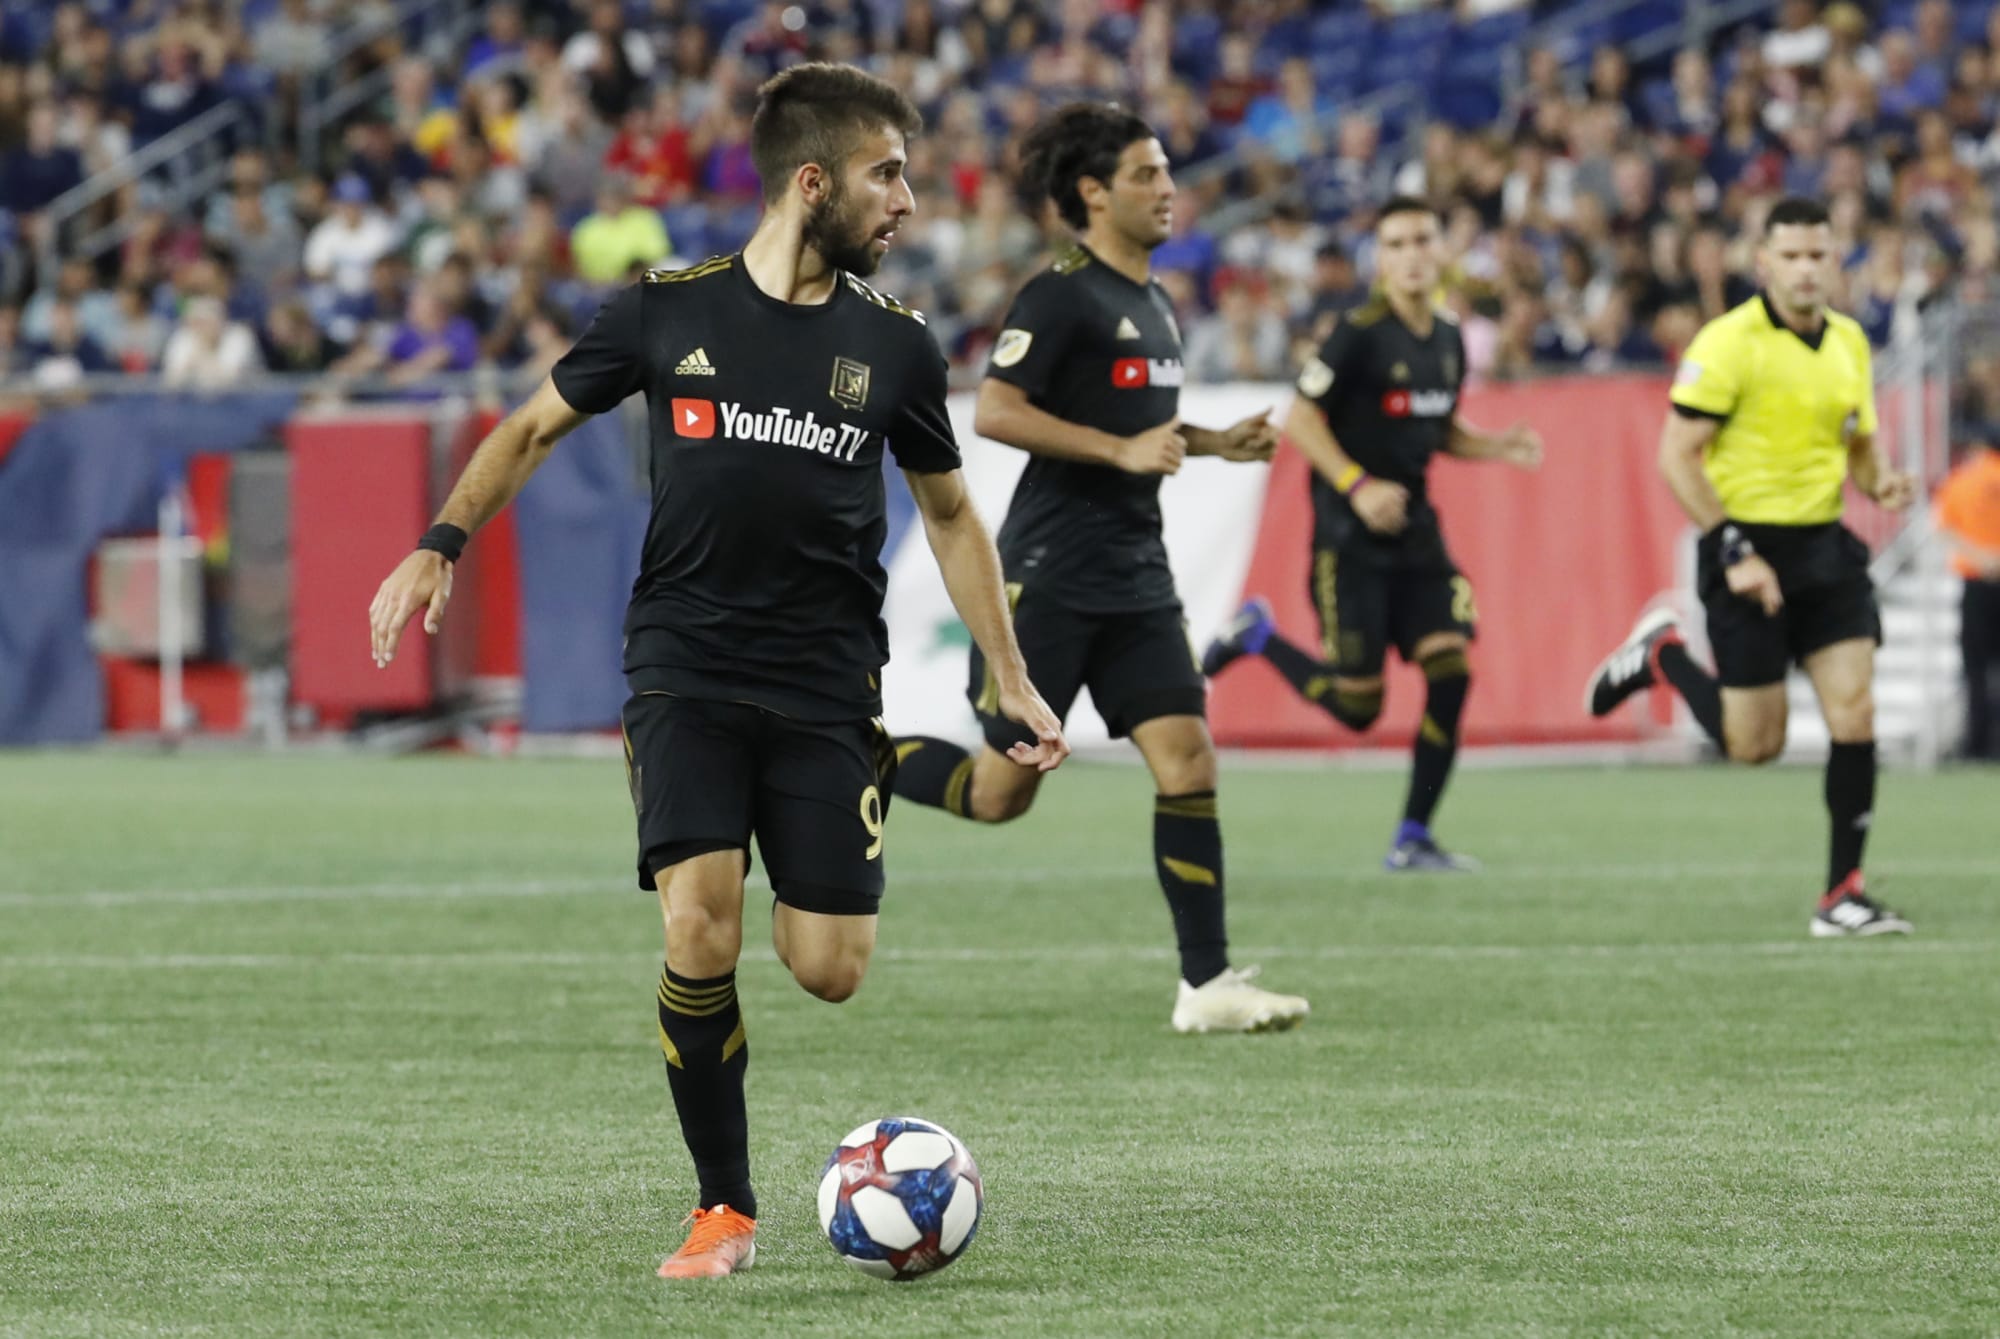 New England Revolution Vs LAFC: 3 things we learned - Delightful Diego ...